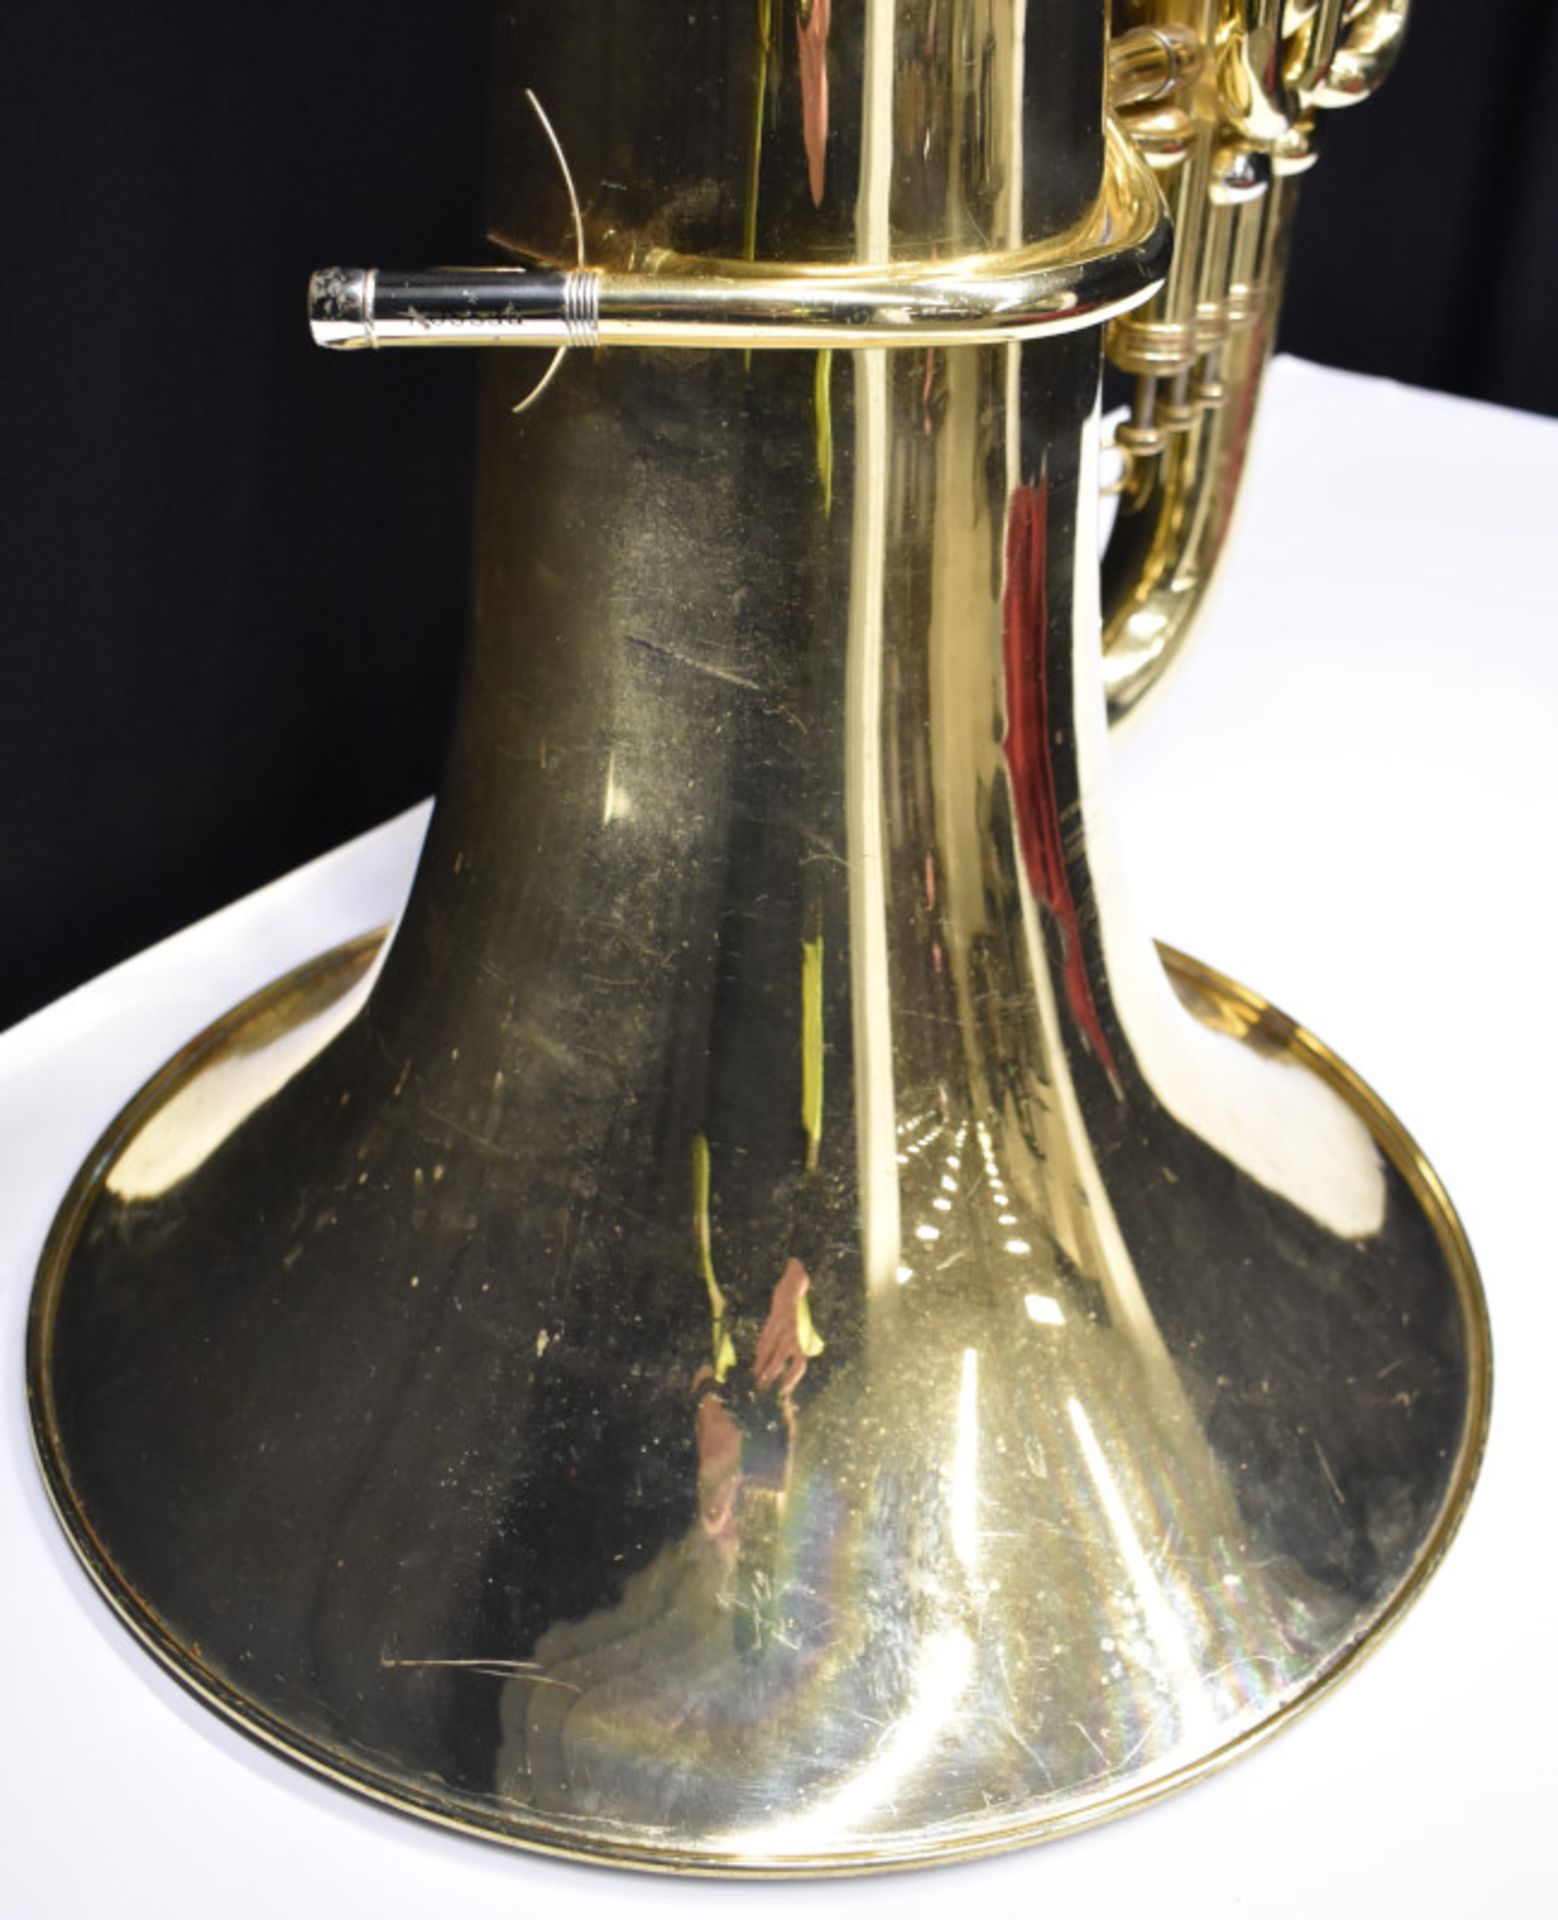 Besson Sovereign BE994 Tuba in Besson Case (case damaged no wheels) - Serial No. 883092 - - Image 19 of 21